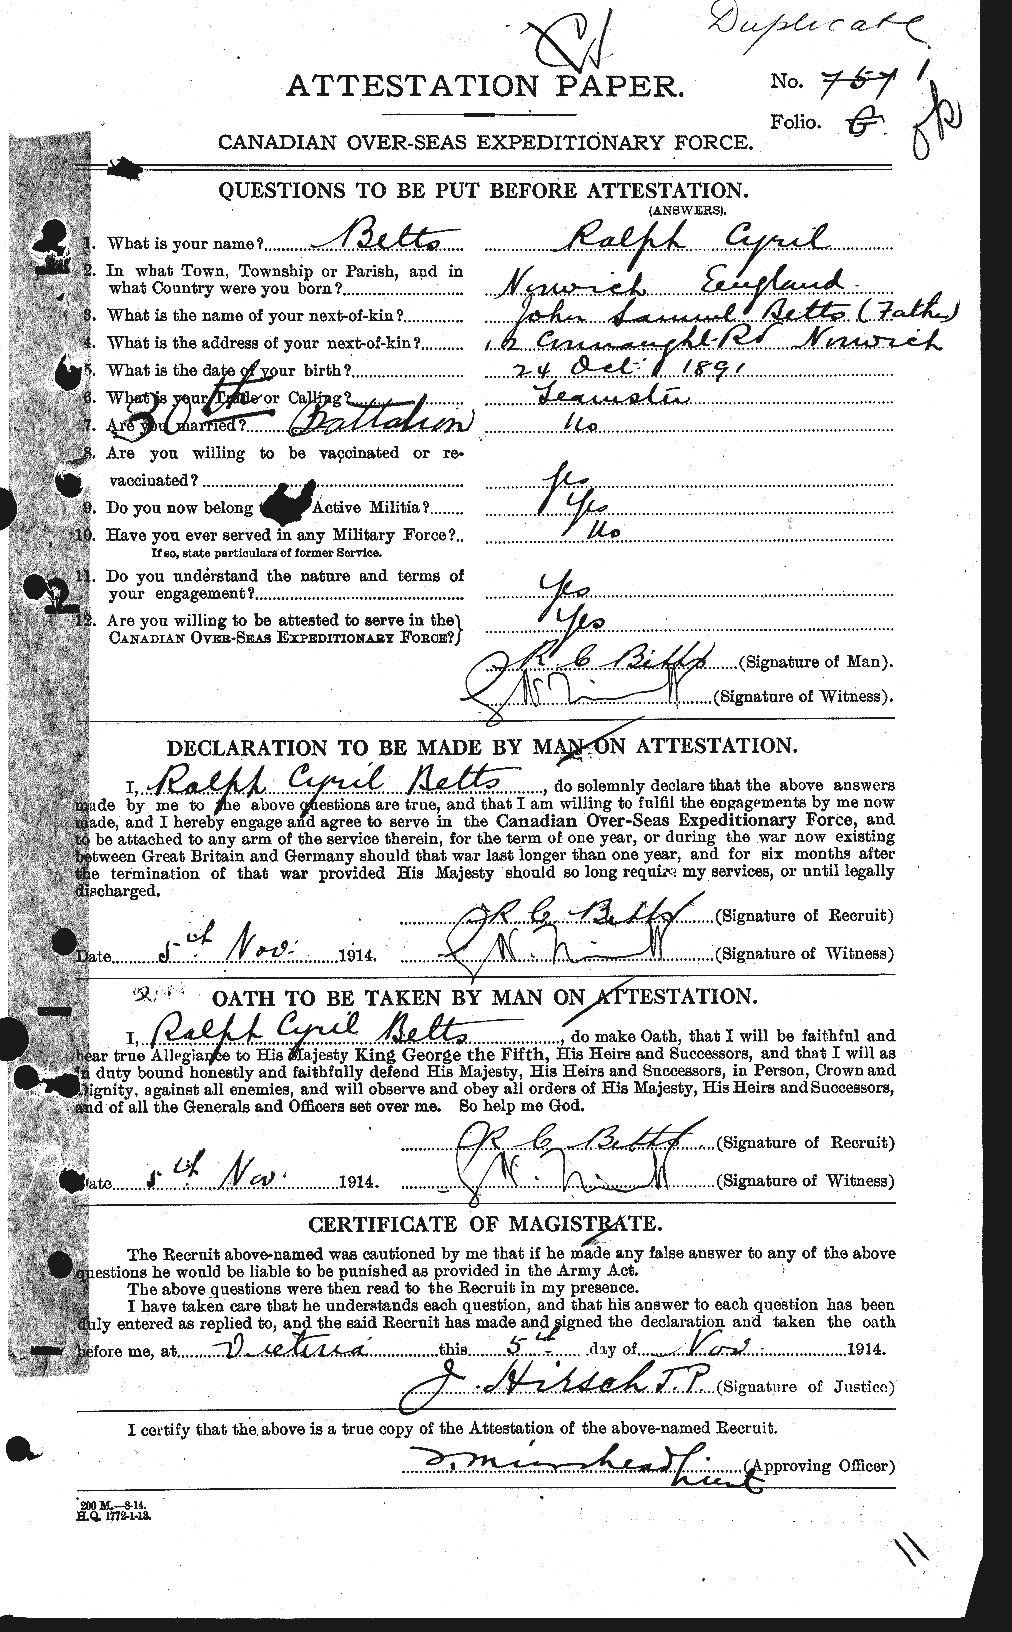 Personnel Records of the First World War - CEF 237190a